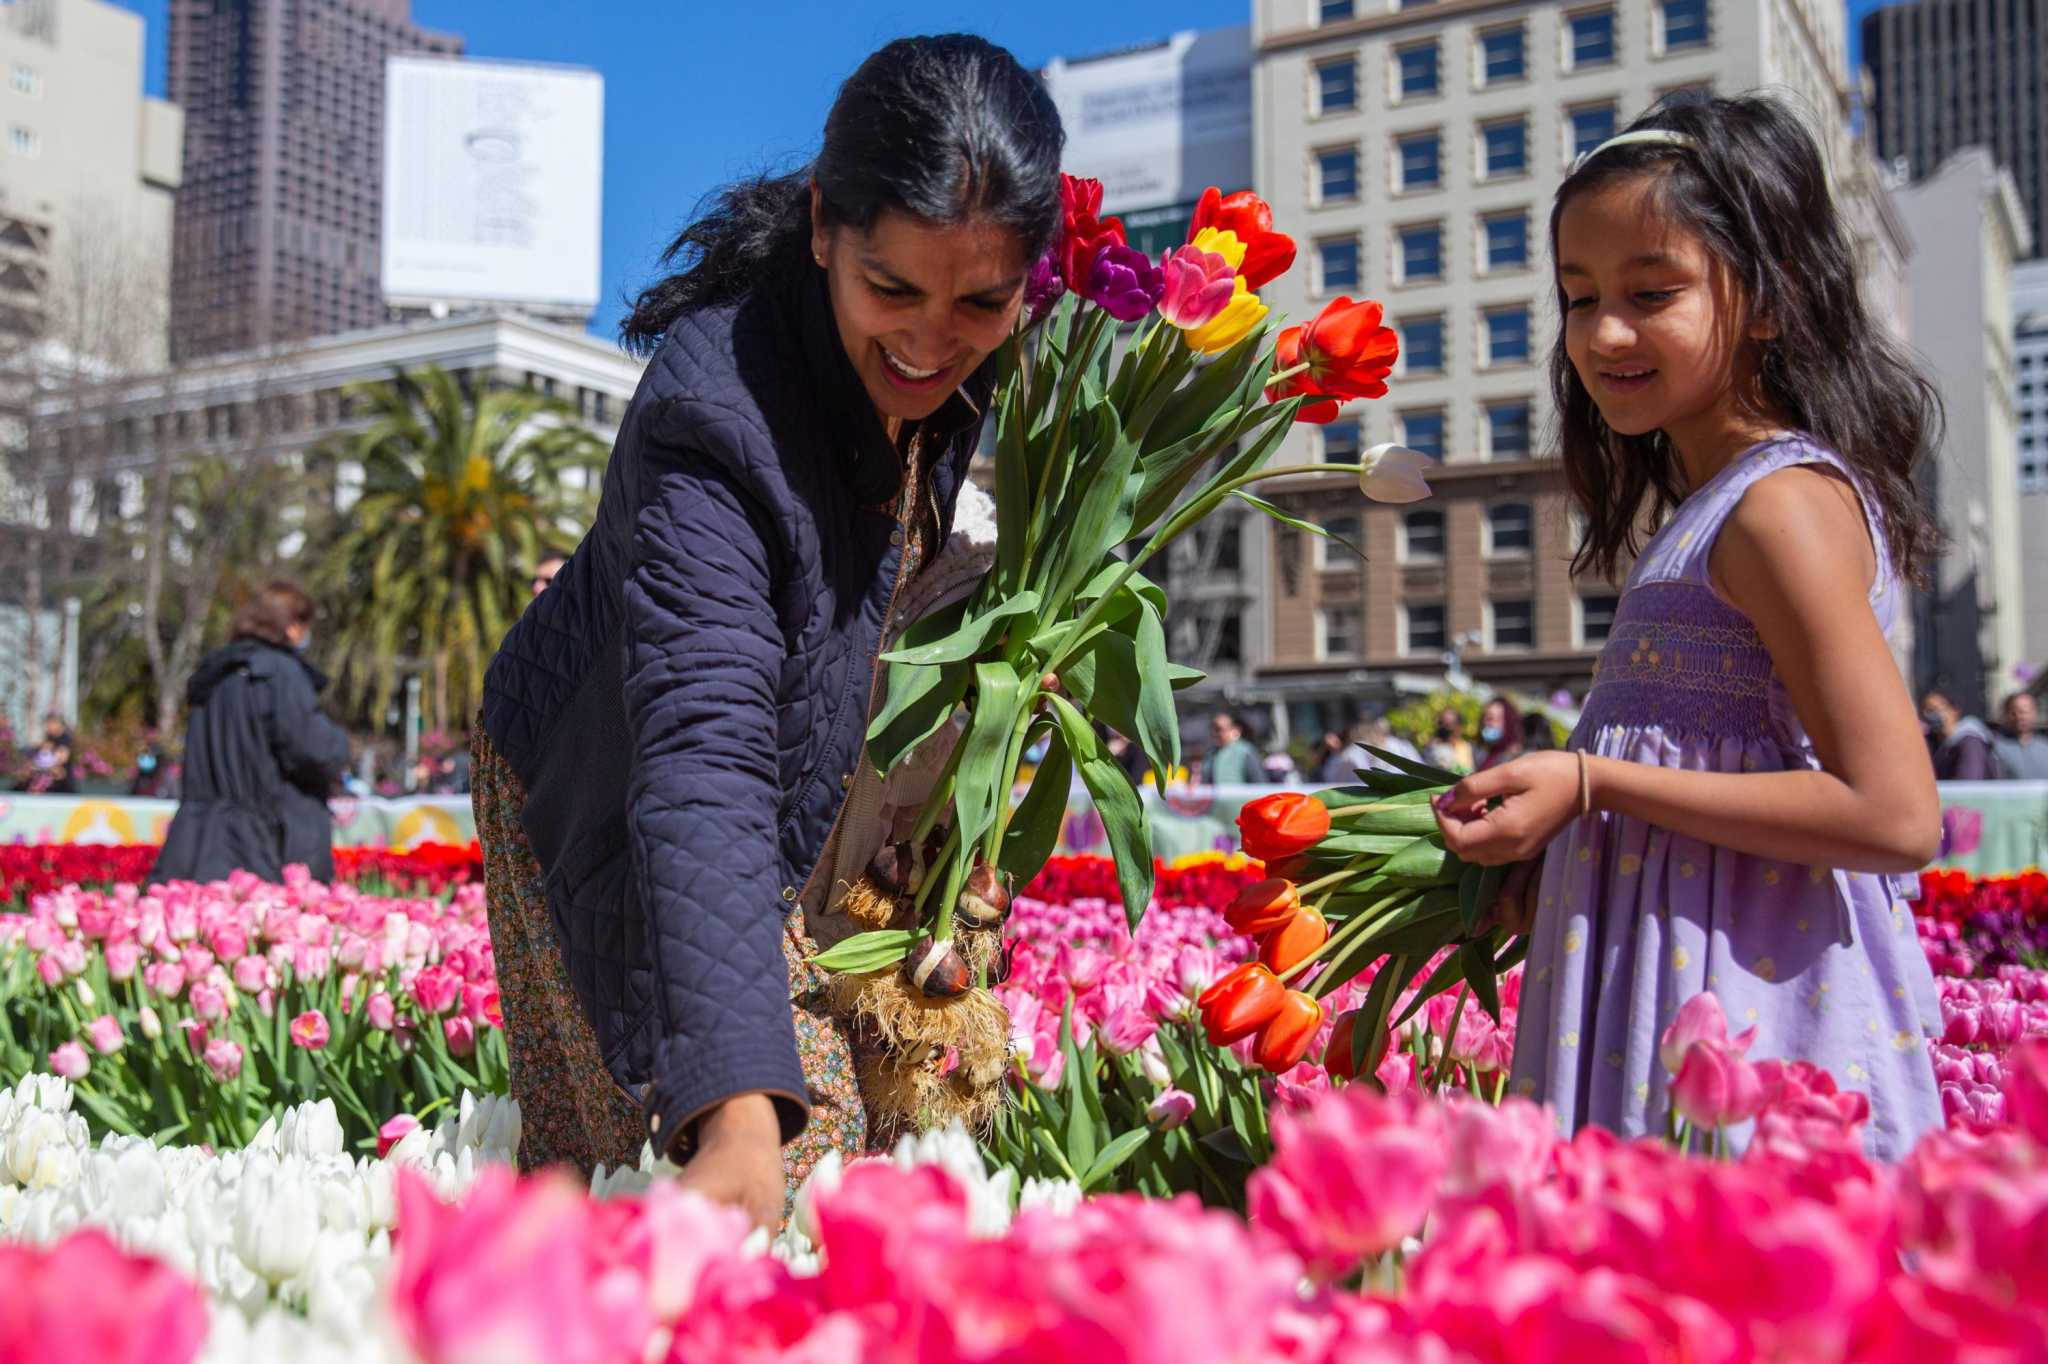 Free tulips draw thousands to S.F.’s Union Square